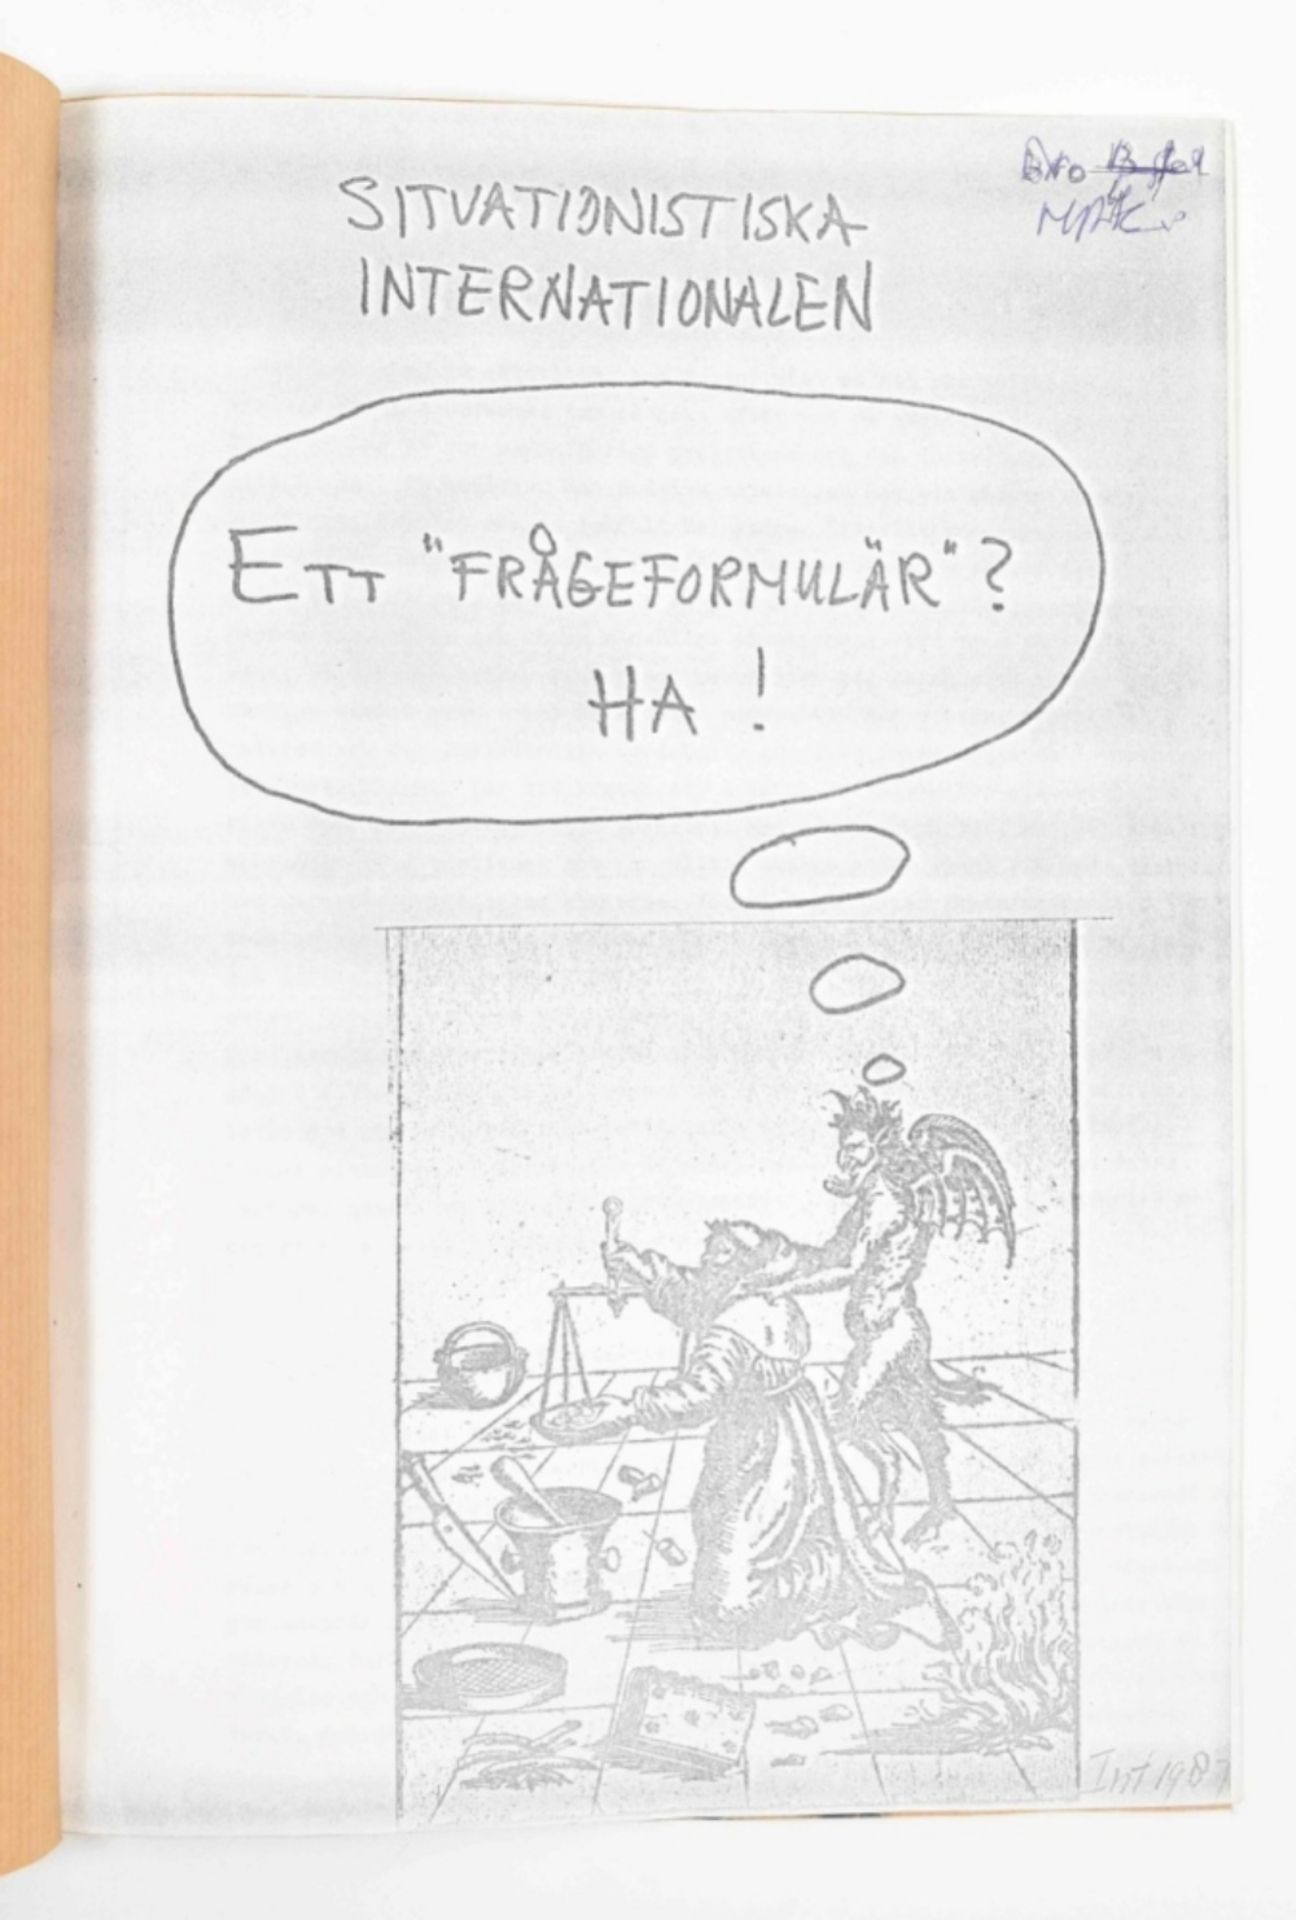 [Situationists] Scandinavian Situationist reference works - Image 7 of 7